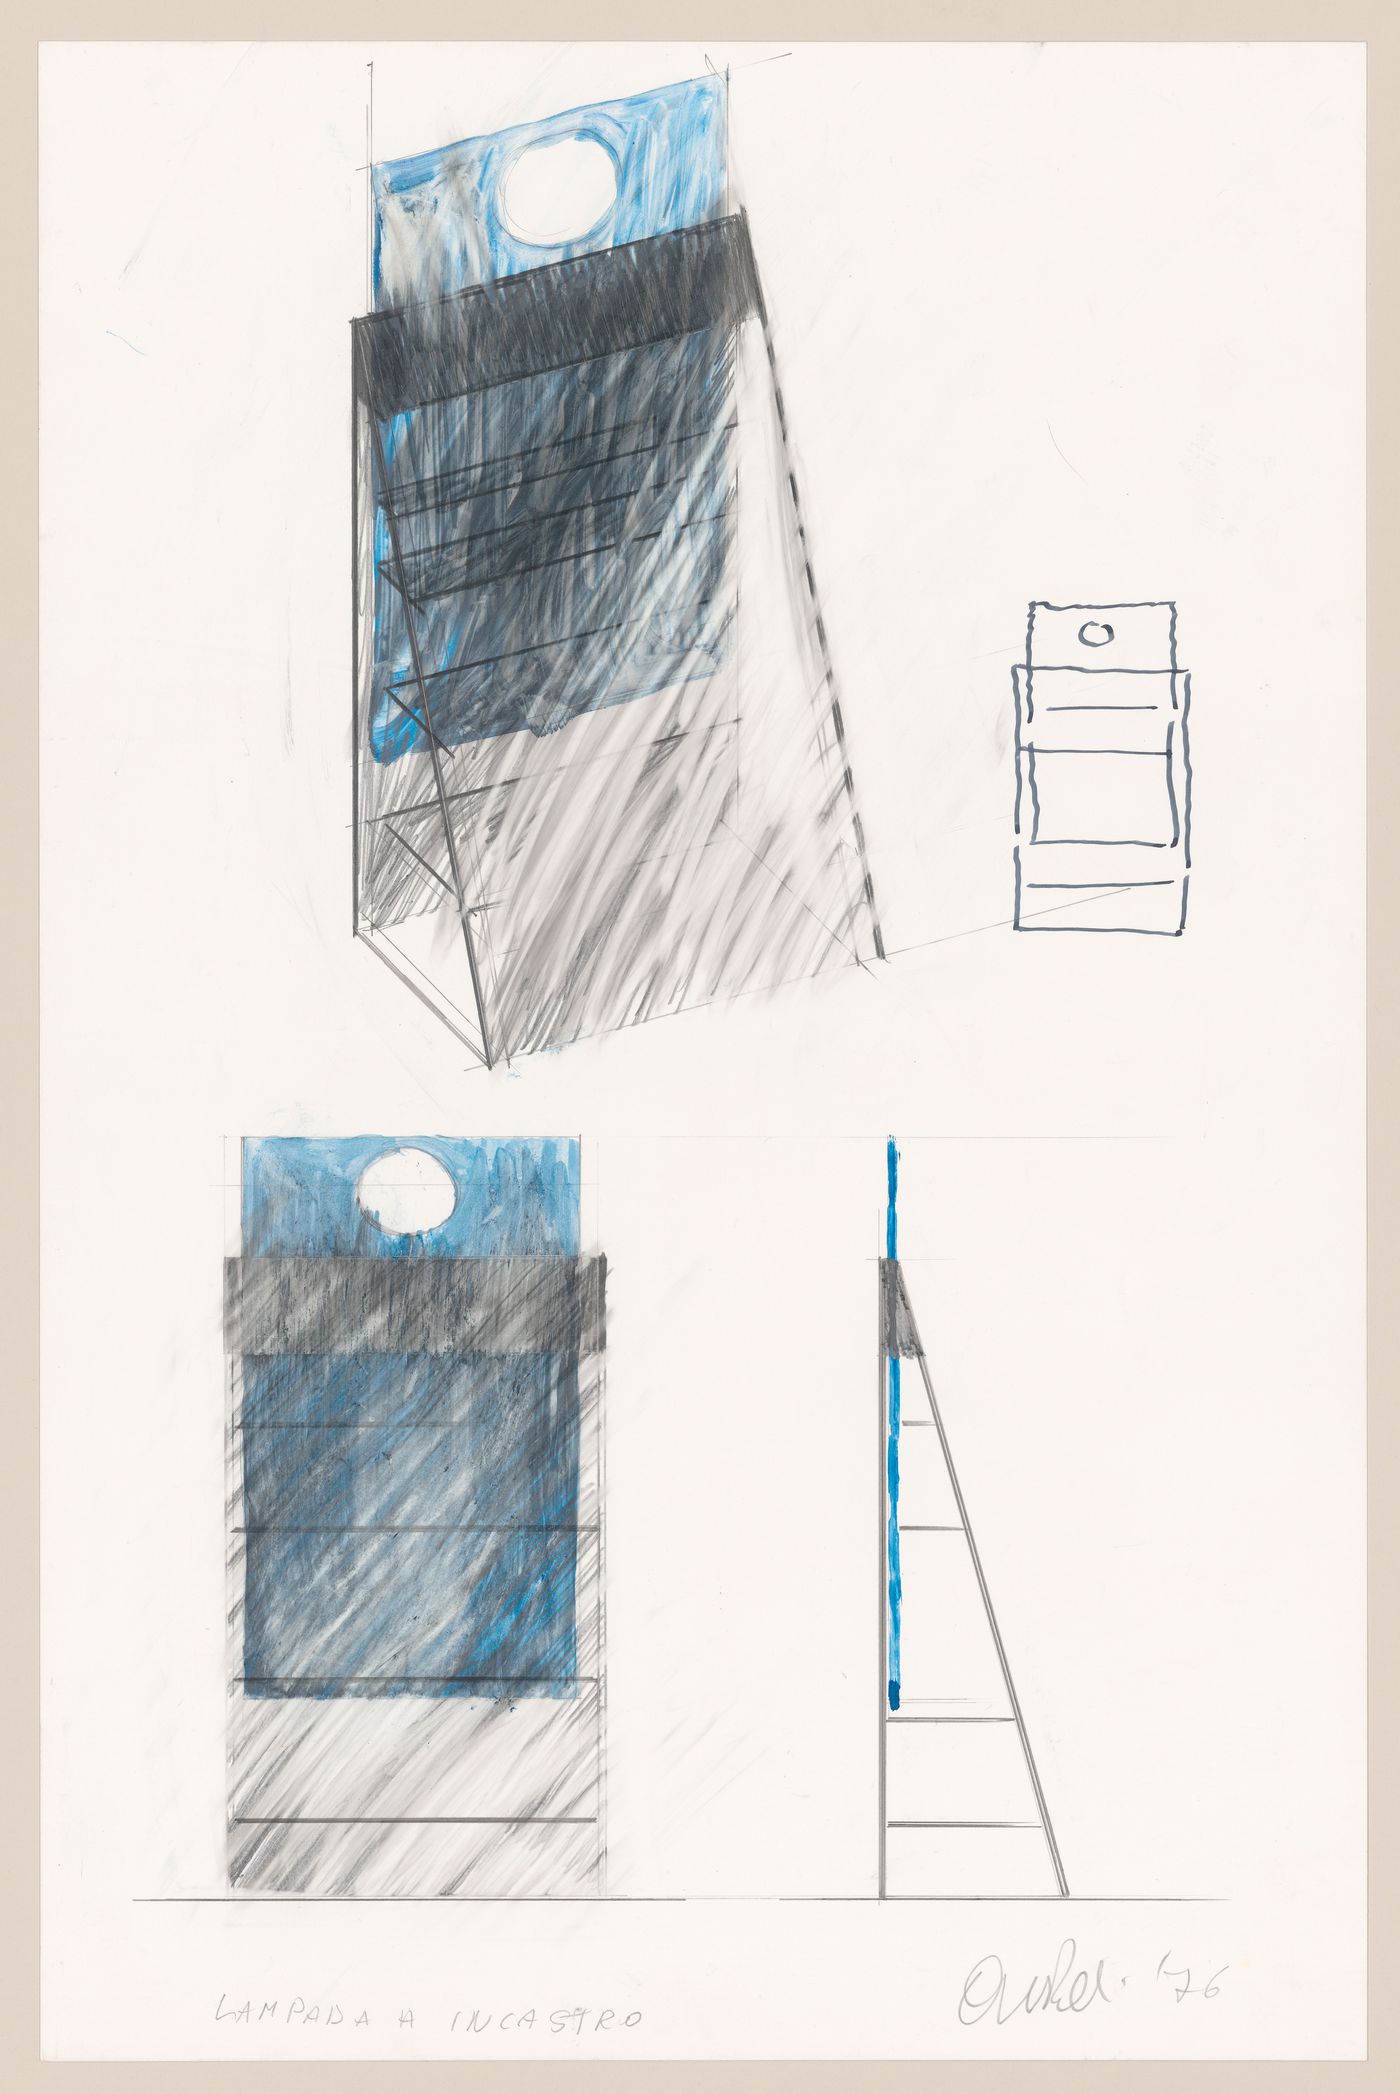 Sketches (from the project-file "Sketches and drawings on various projects, including lamp designs, 1970s-1980s")